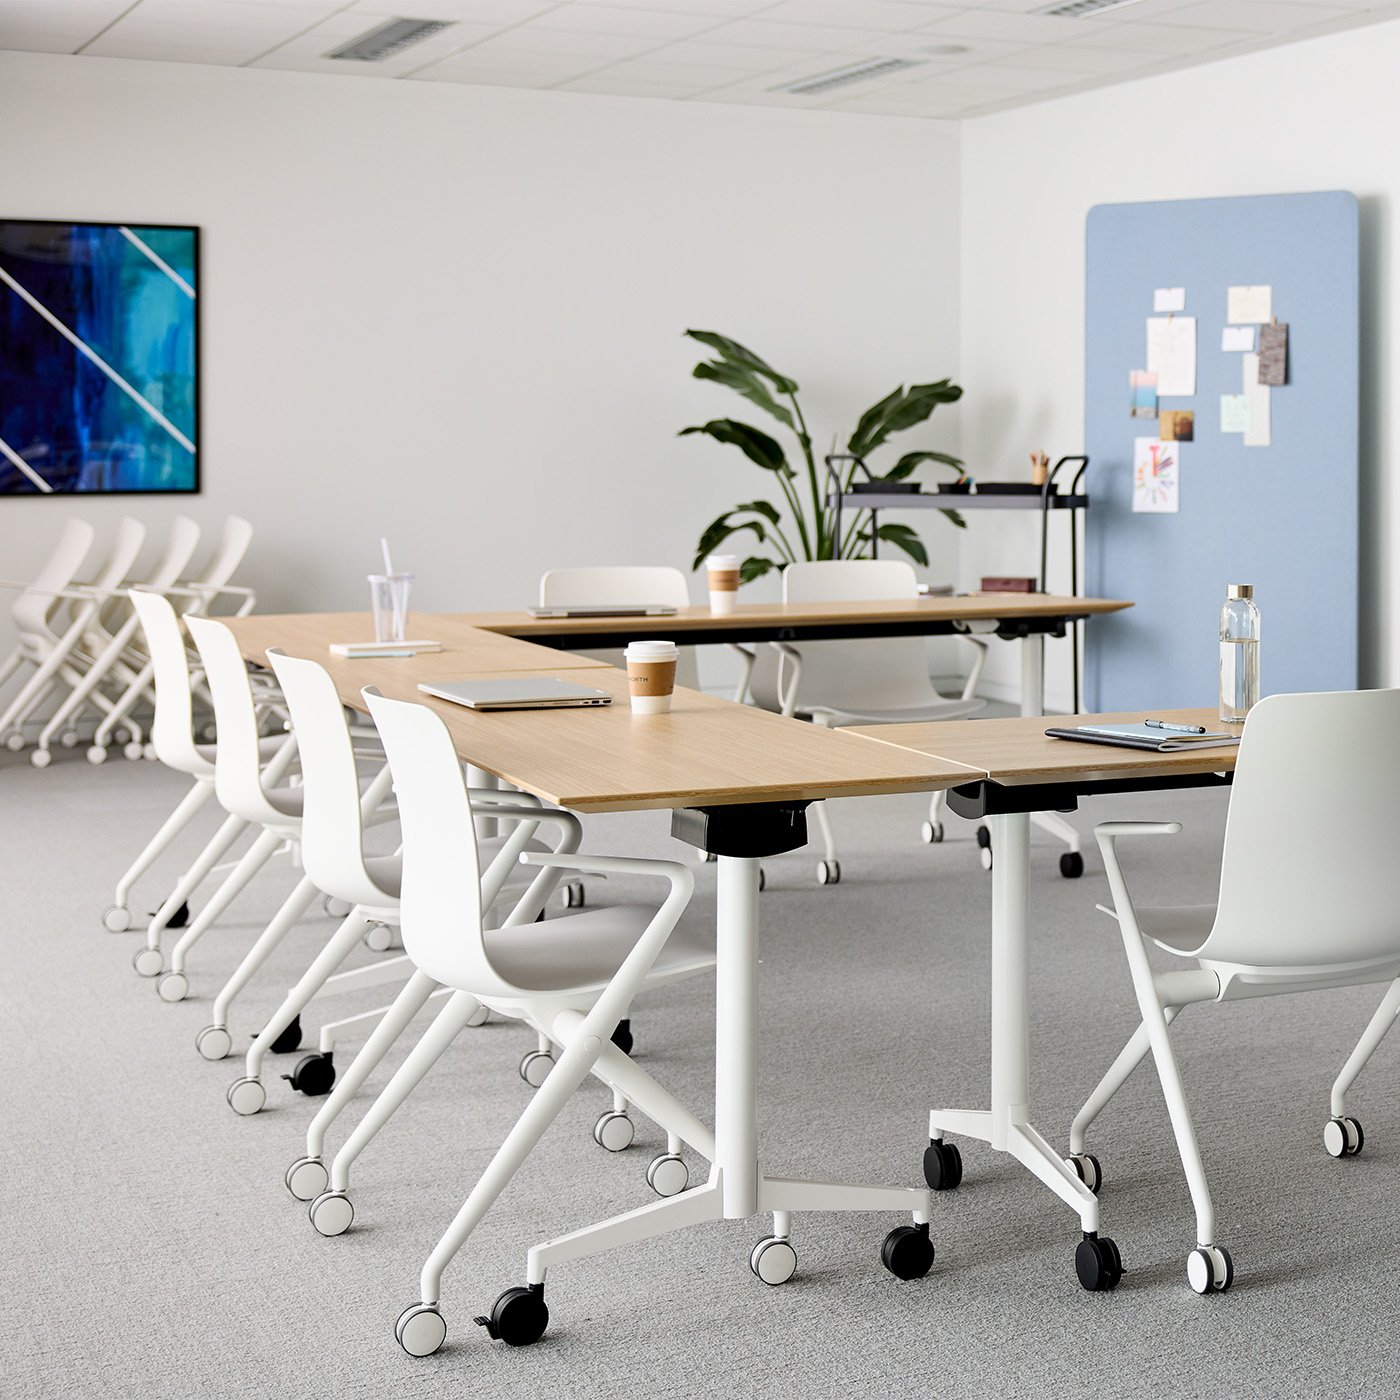 Haworth Bowi conference chairs in white